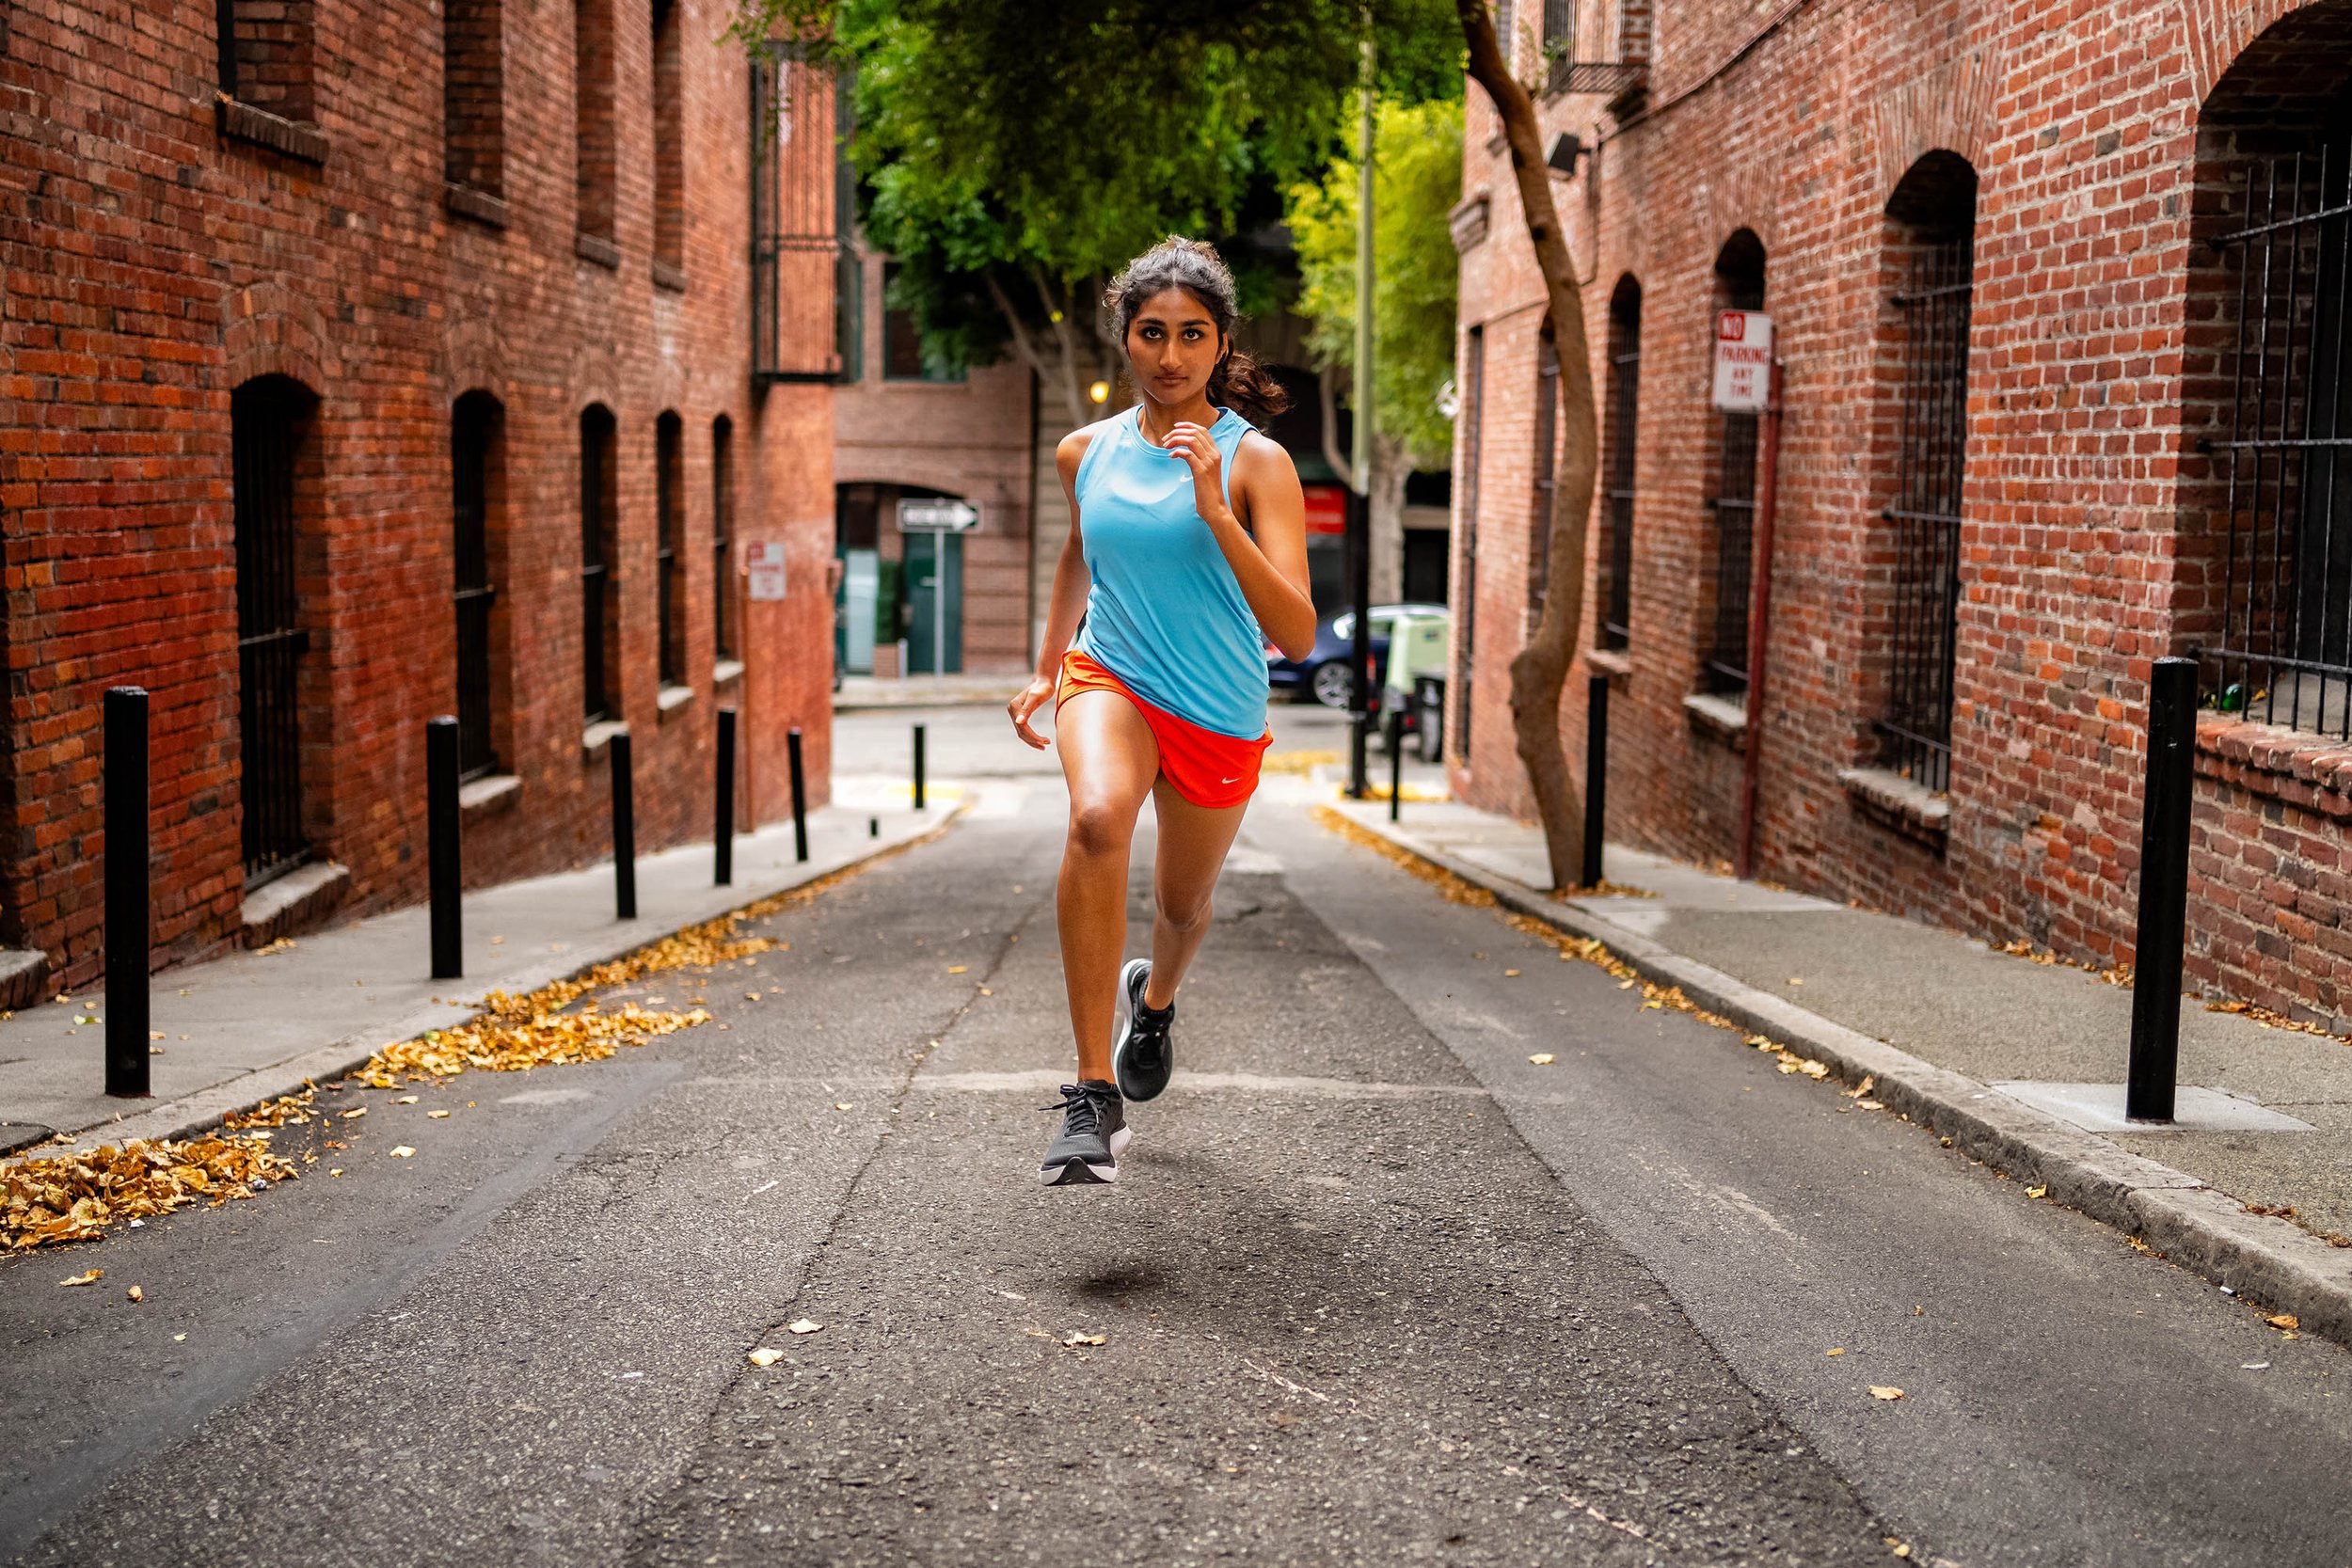  Fitness: A young woman running up an empty alleyway, San Francisco California 